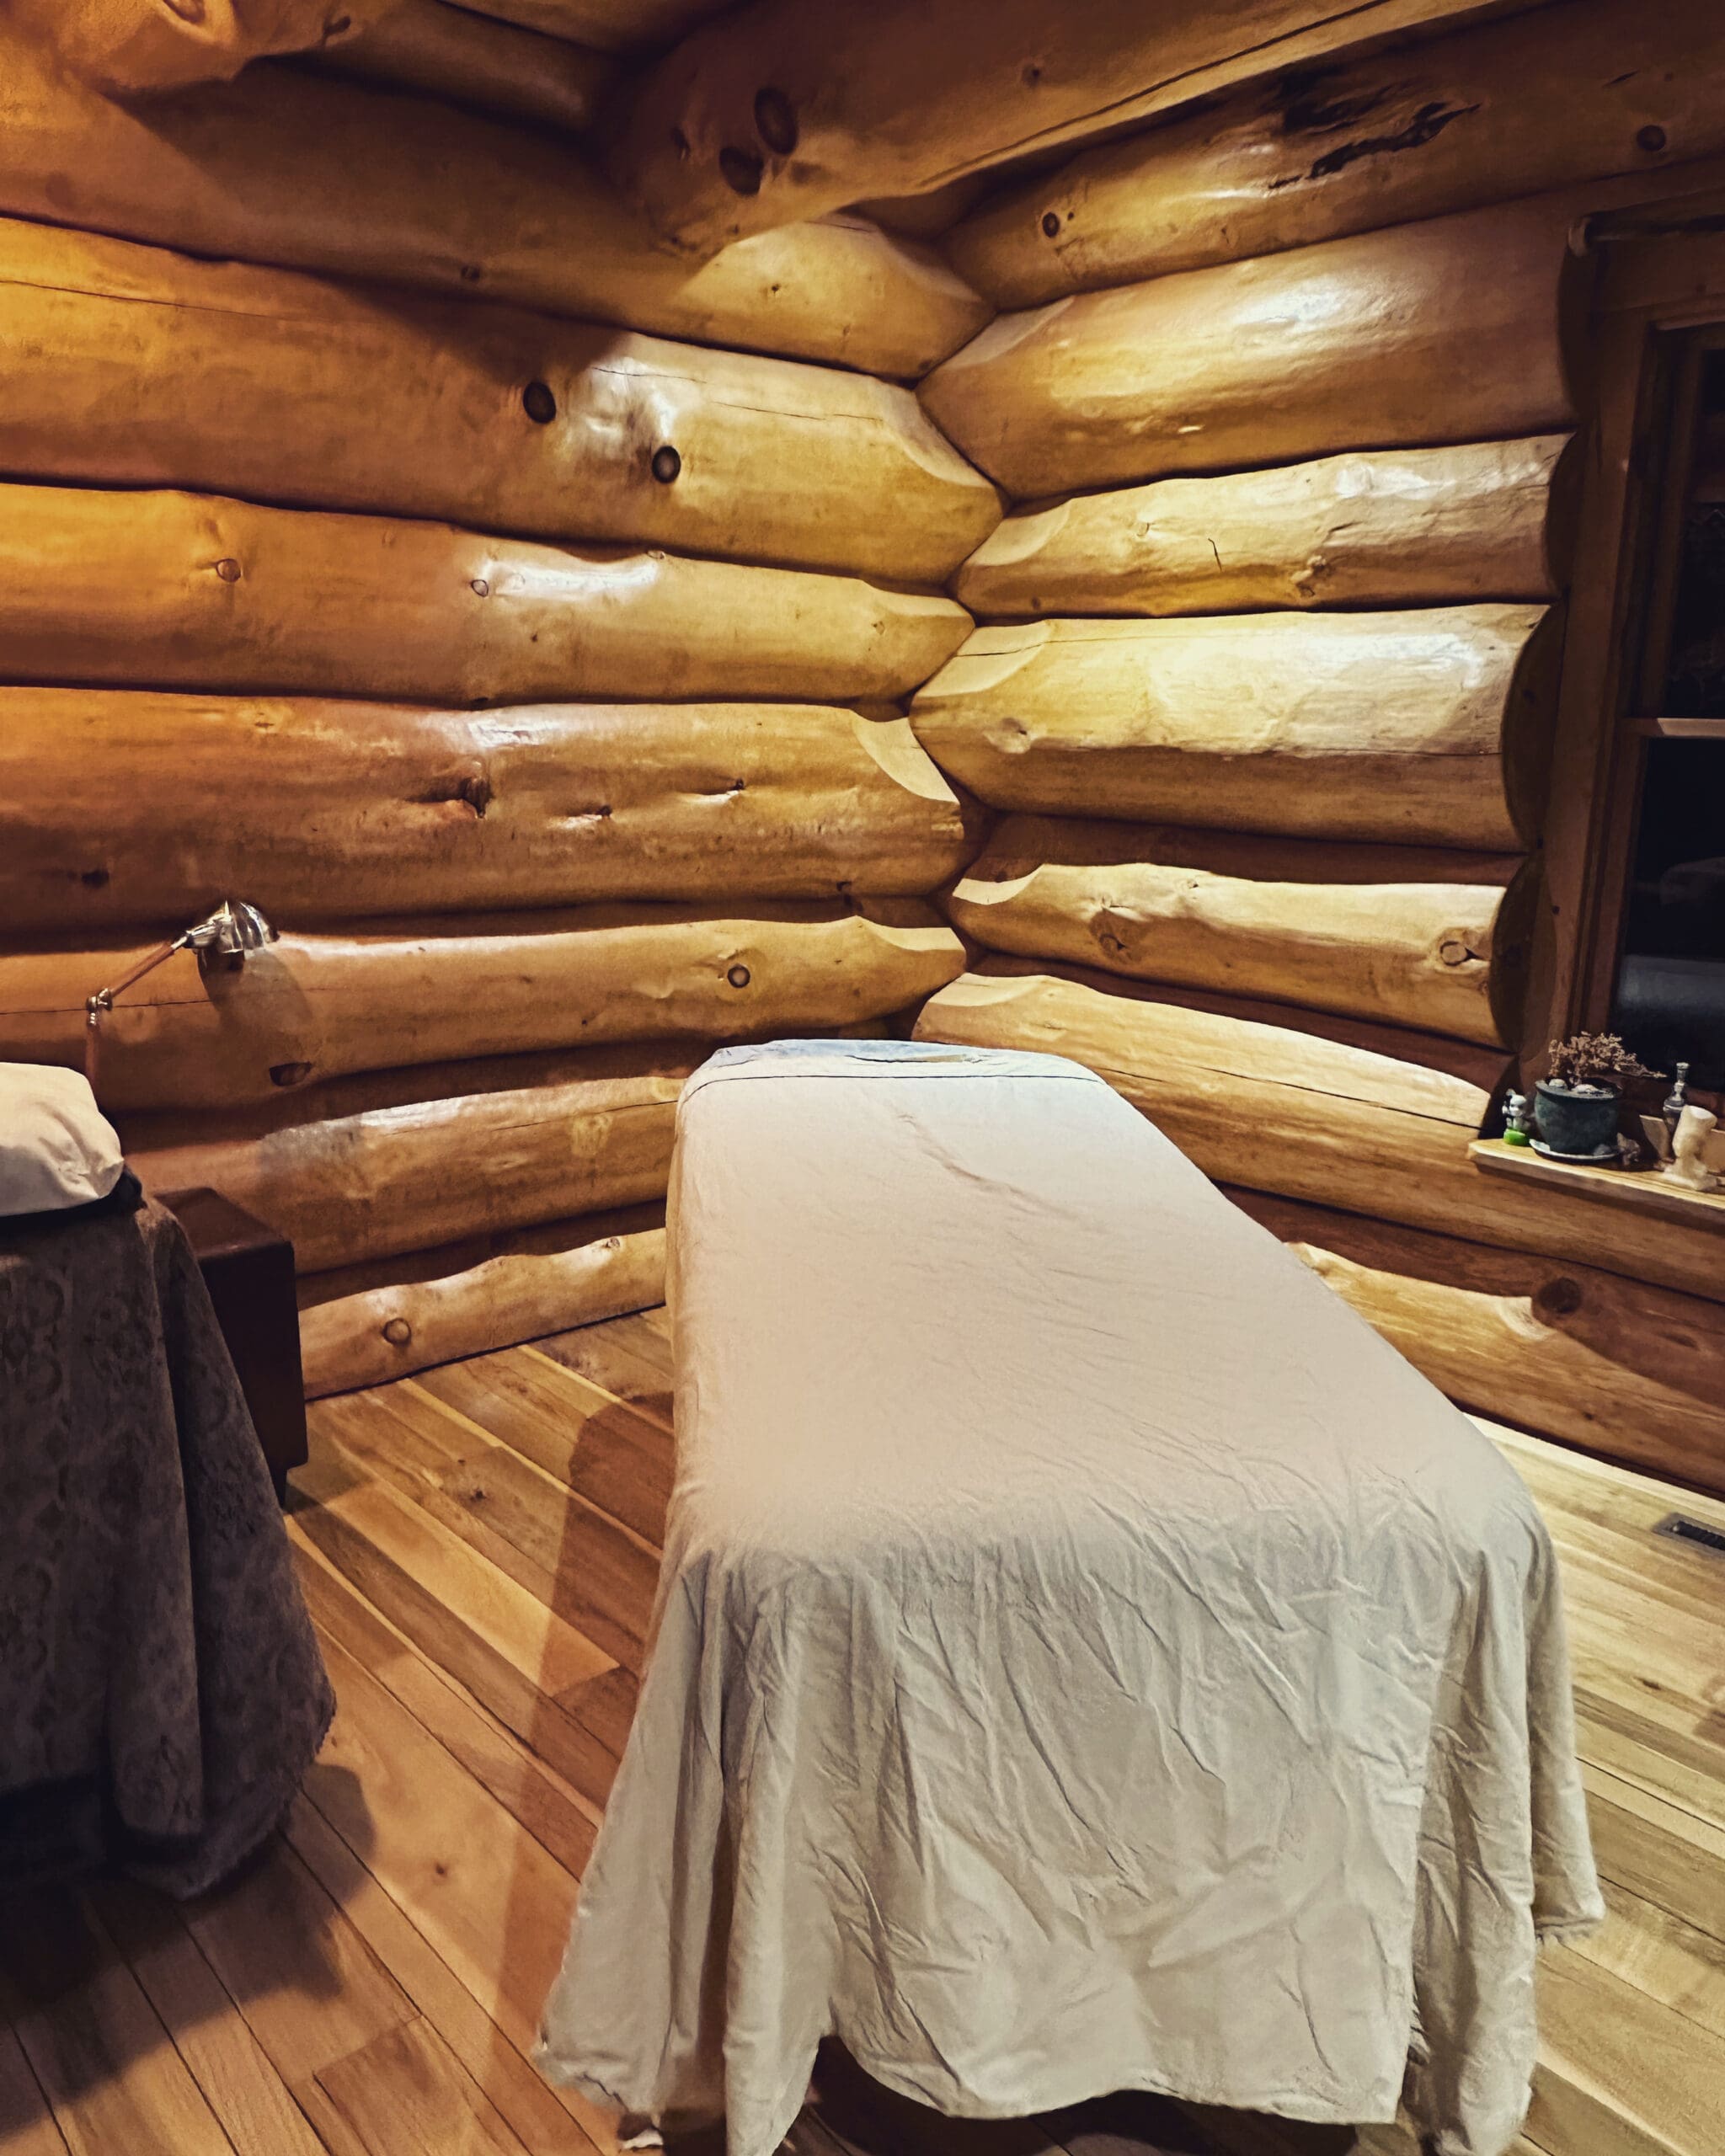 massage table with sheets on it in the corner of a room in a log cabin